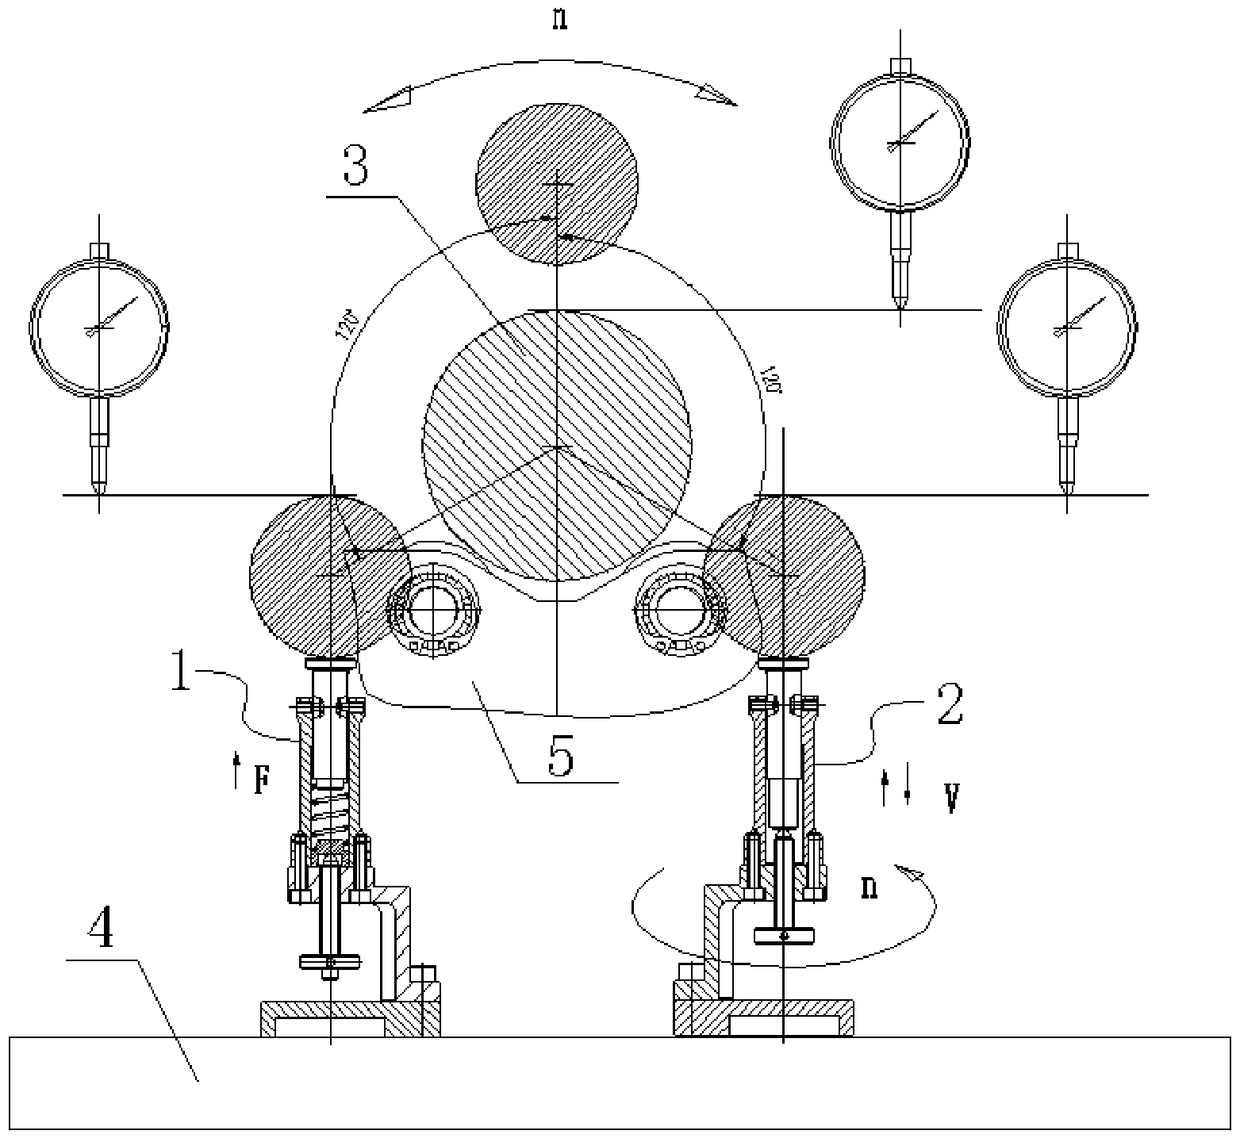 Auxiliary support assembly for detecting the included angle of the crankshaft